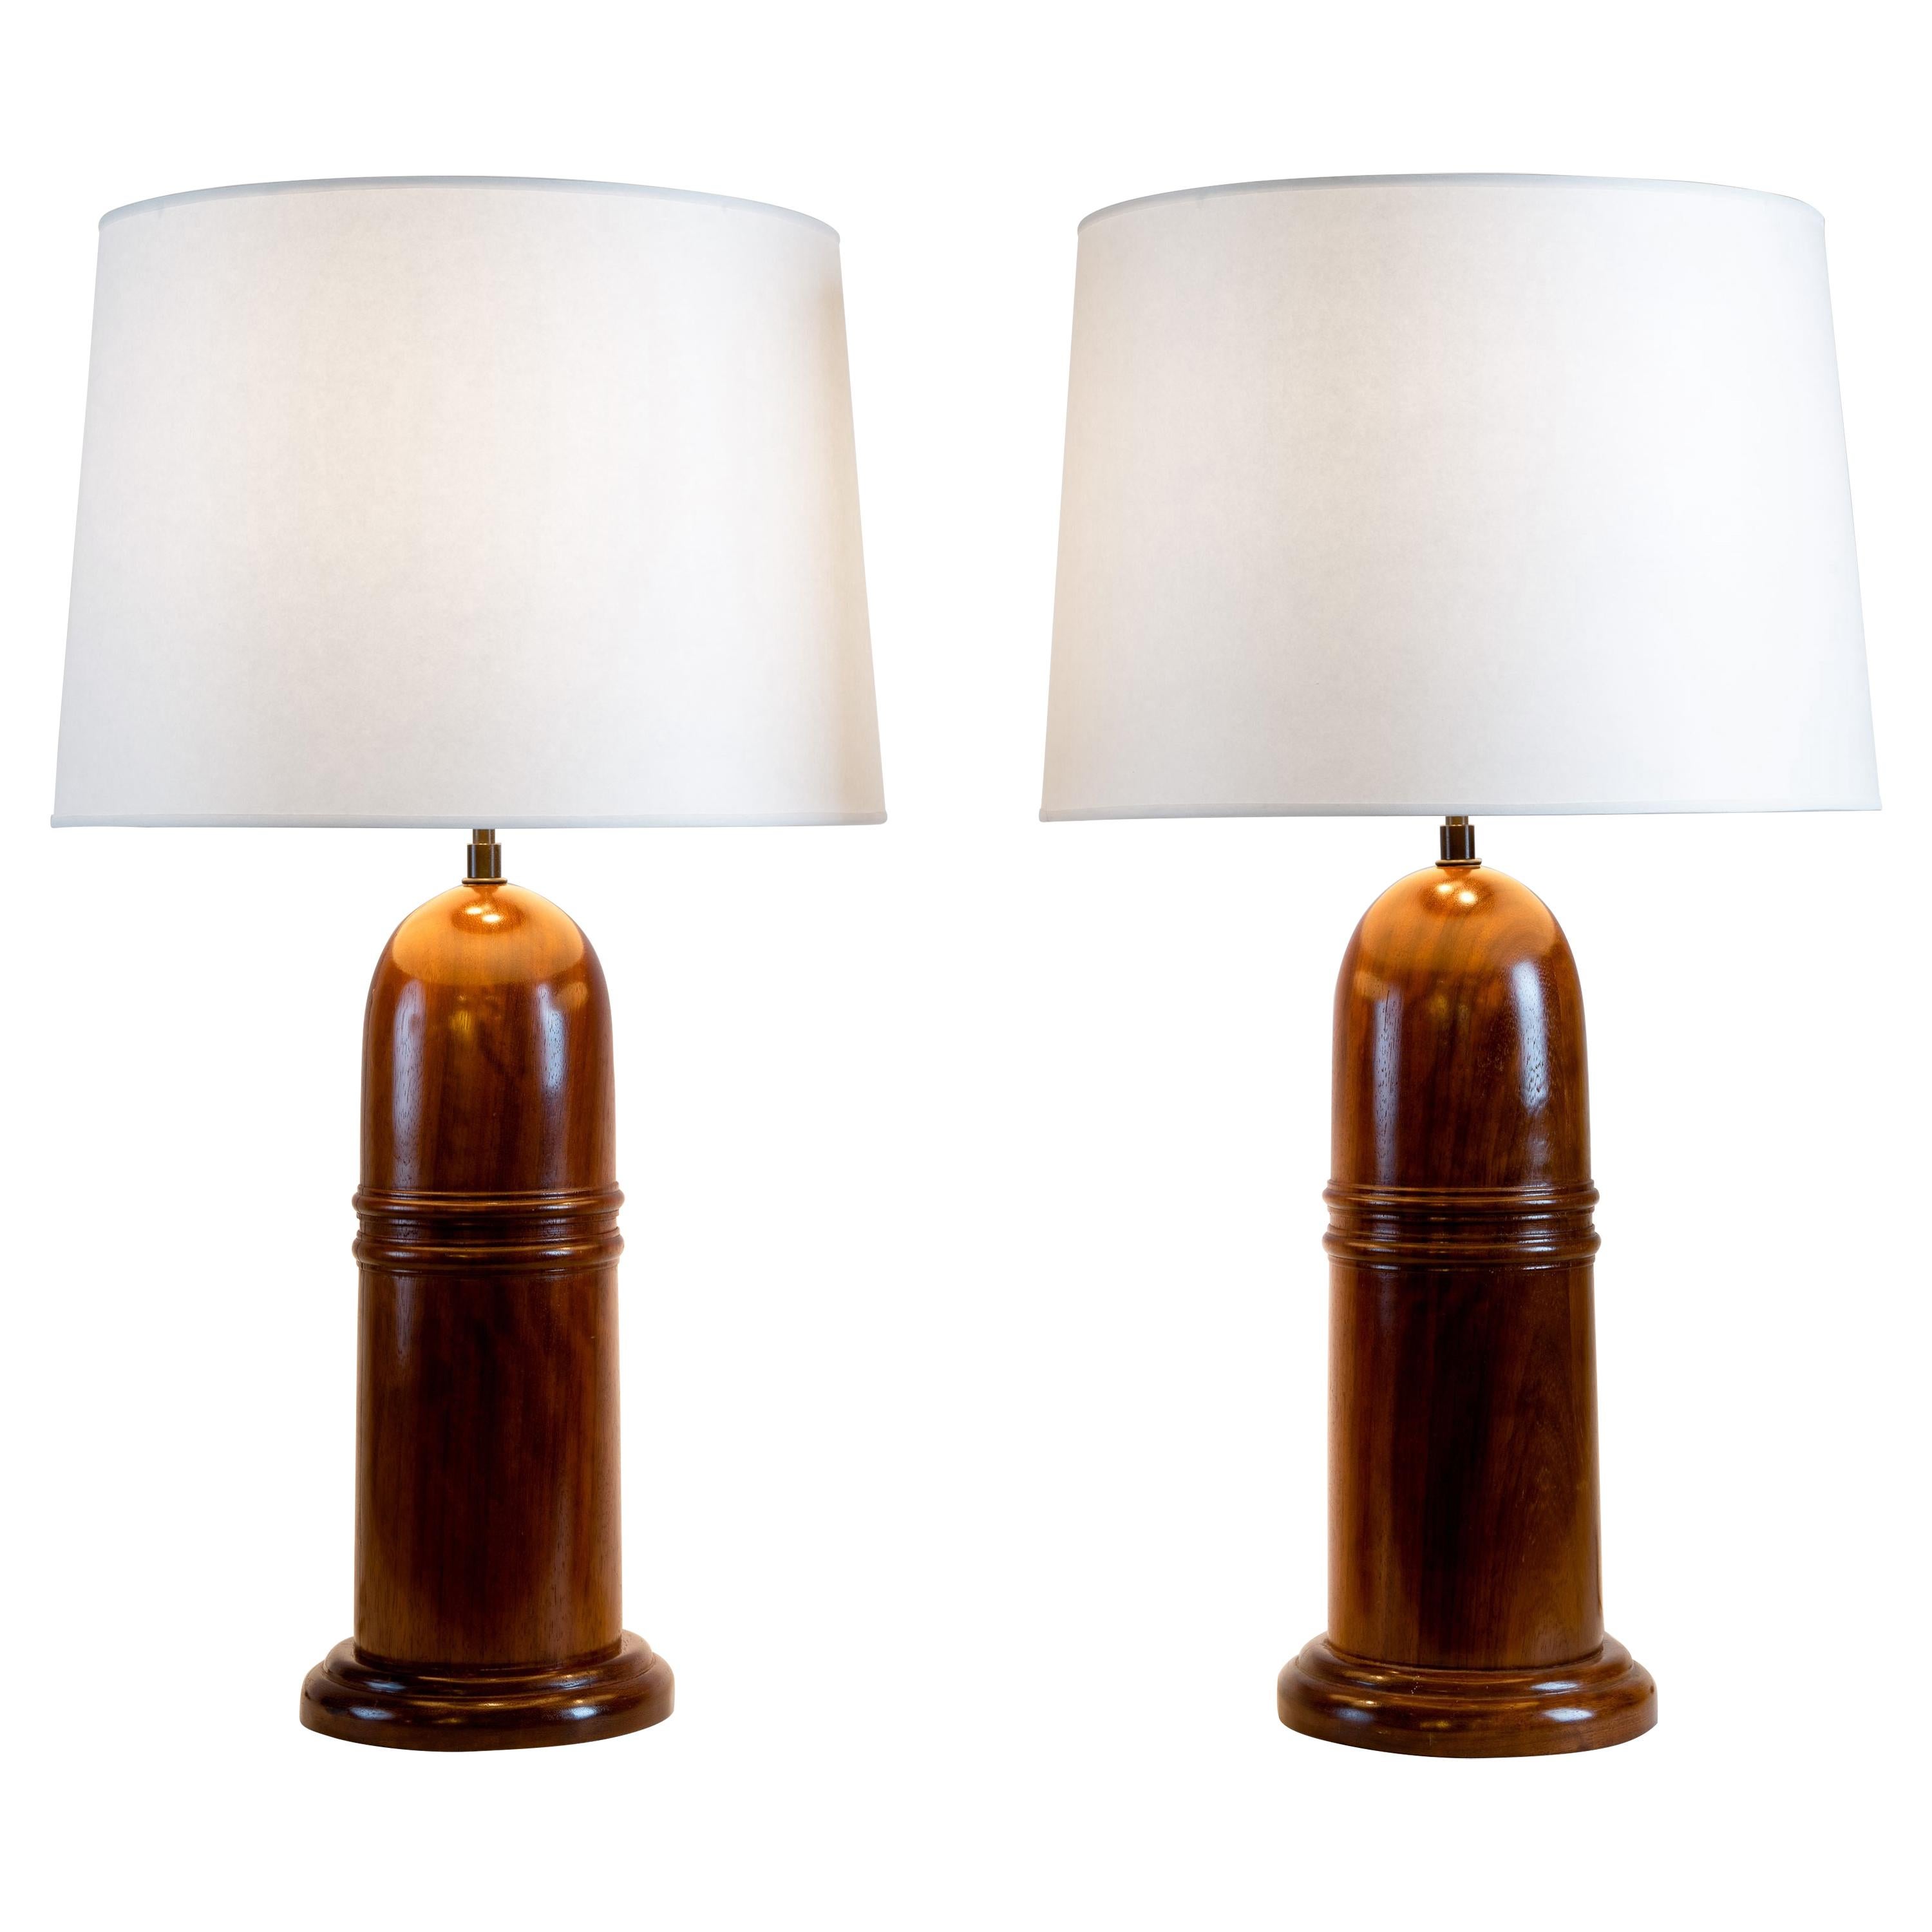 Bill Willis, Pair of Iroko Lamps, Morocco, Late 20th Century For Sale